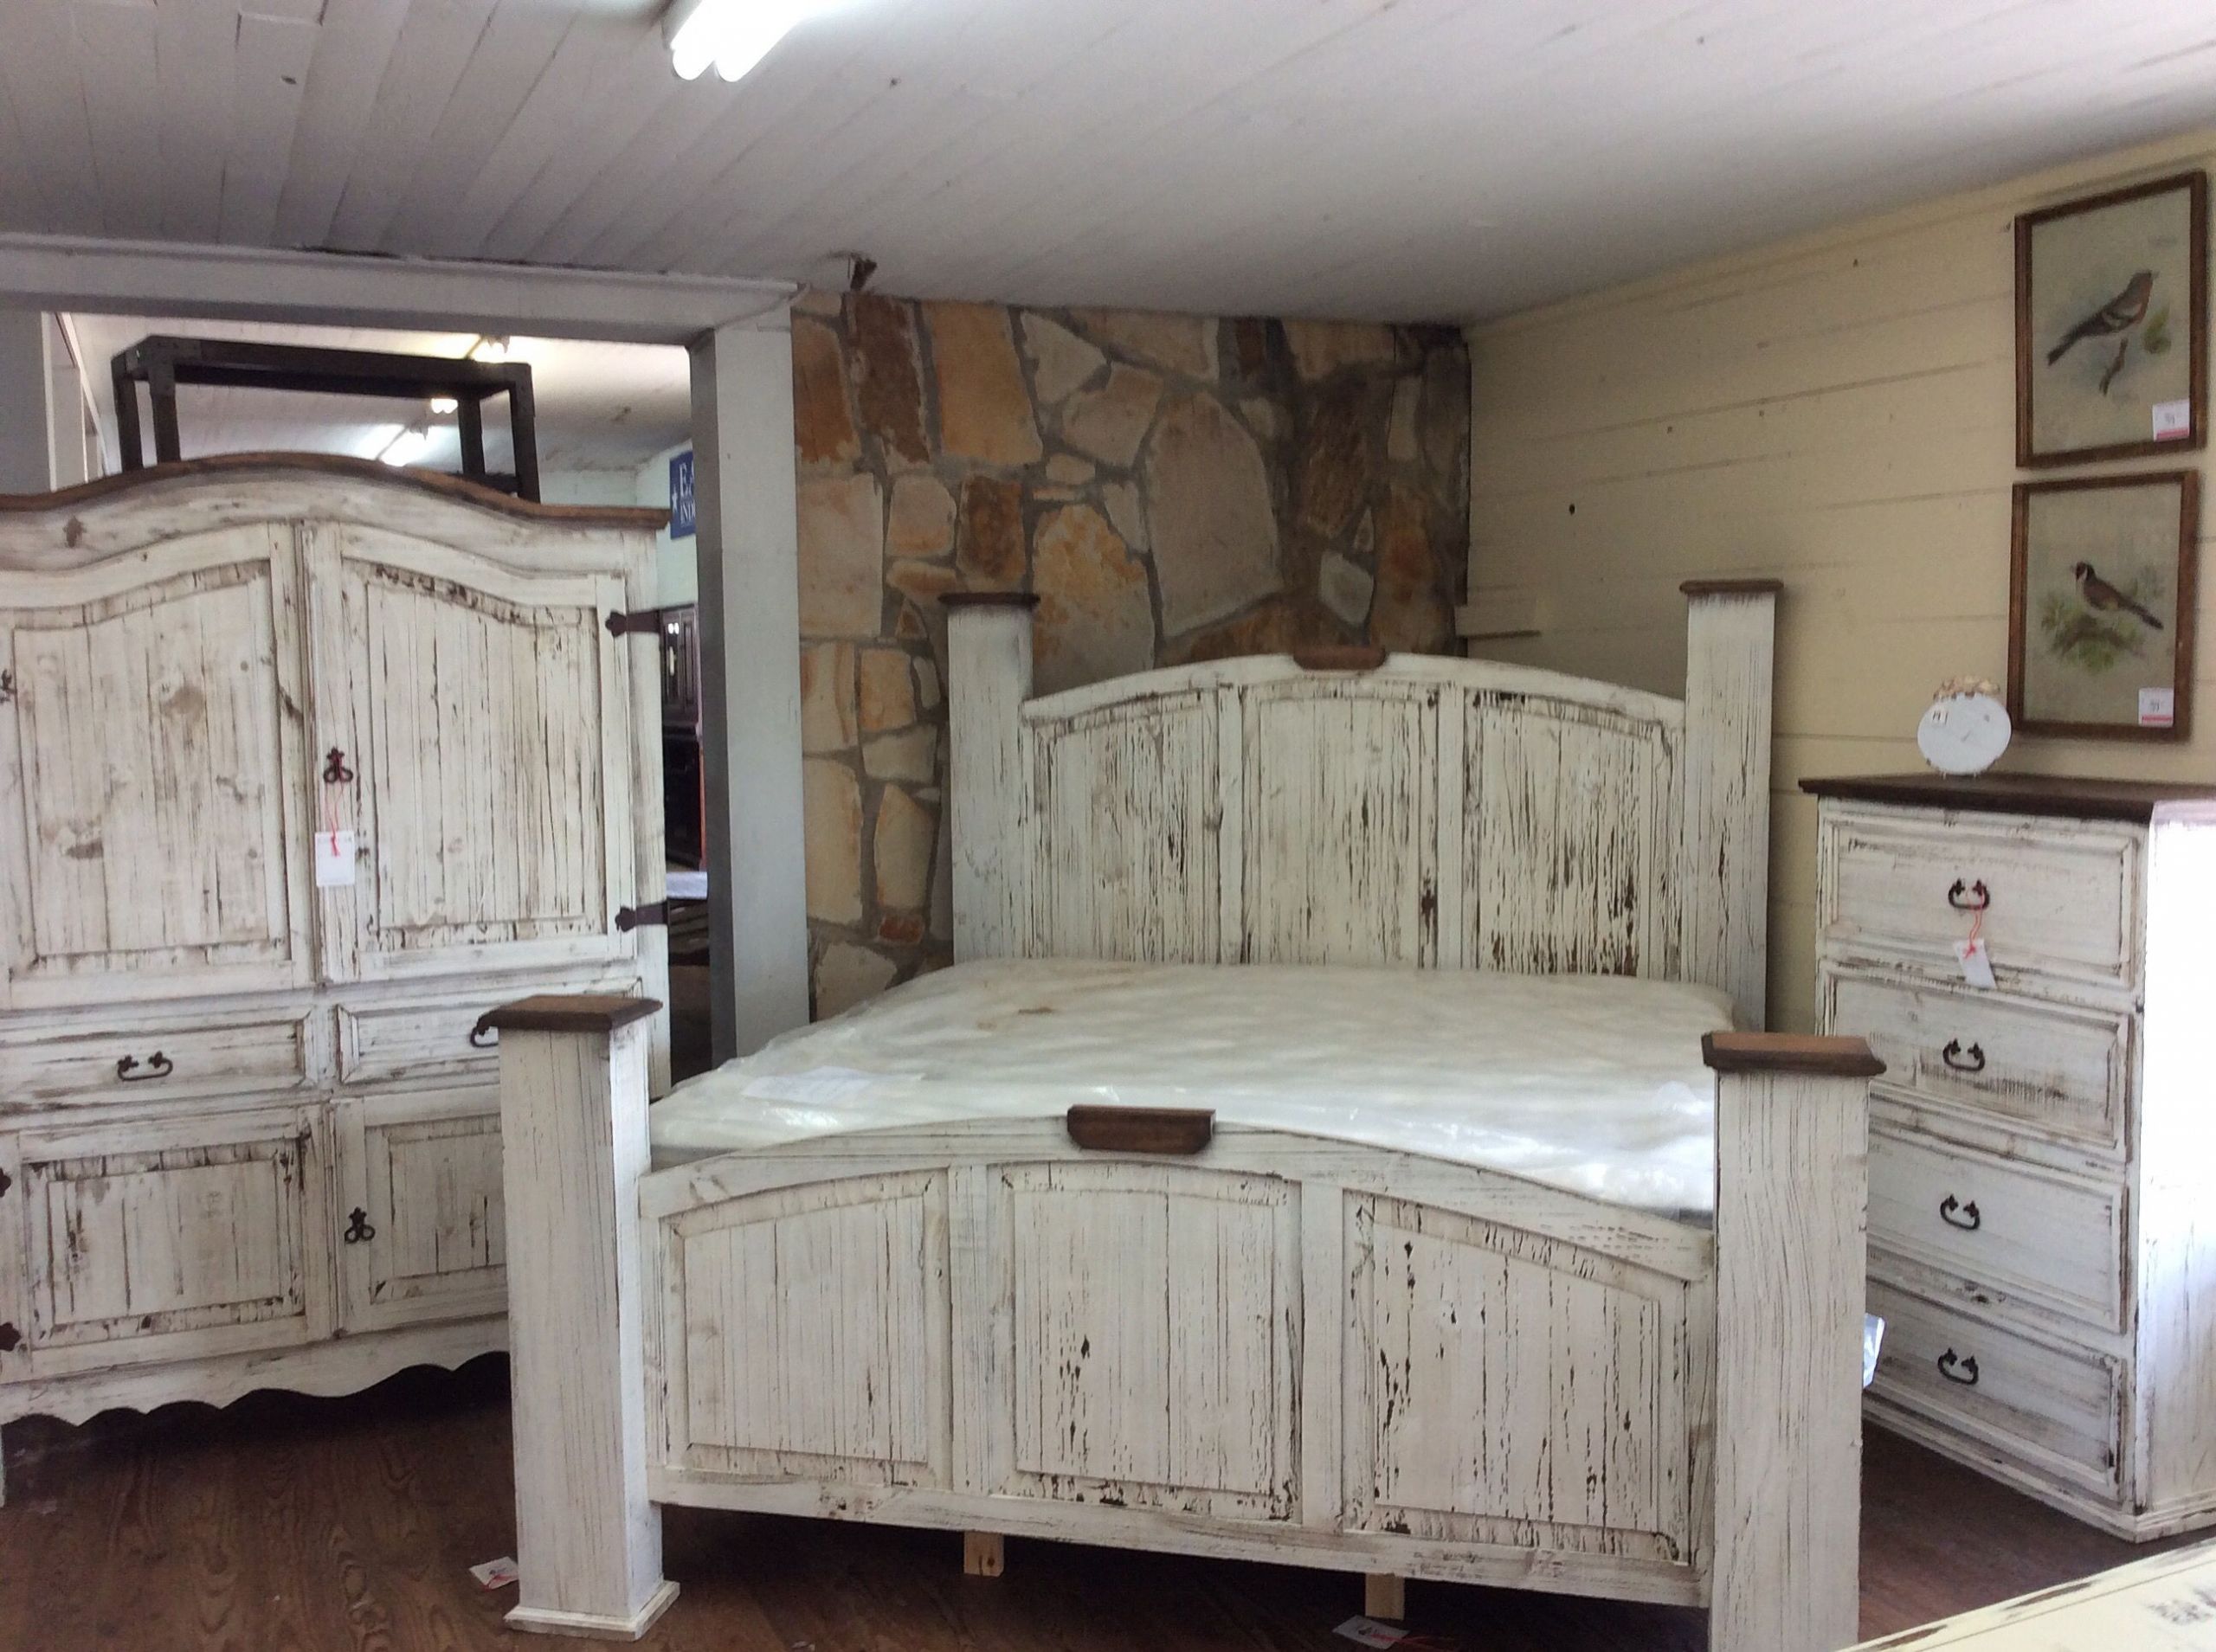 Rustic White Bedroom Furniture
 Texas Rustic of Louisiana s "Antique White" Bedroom Group